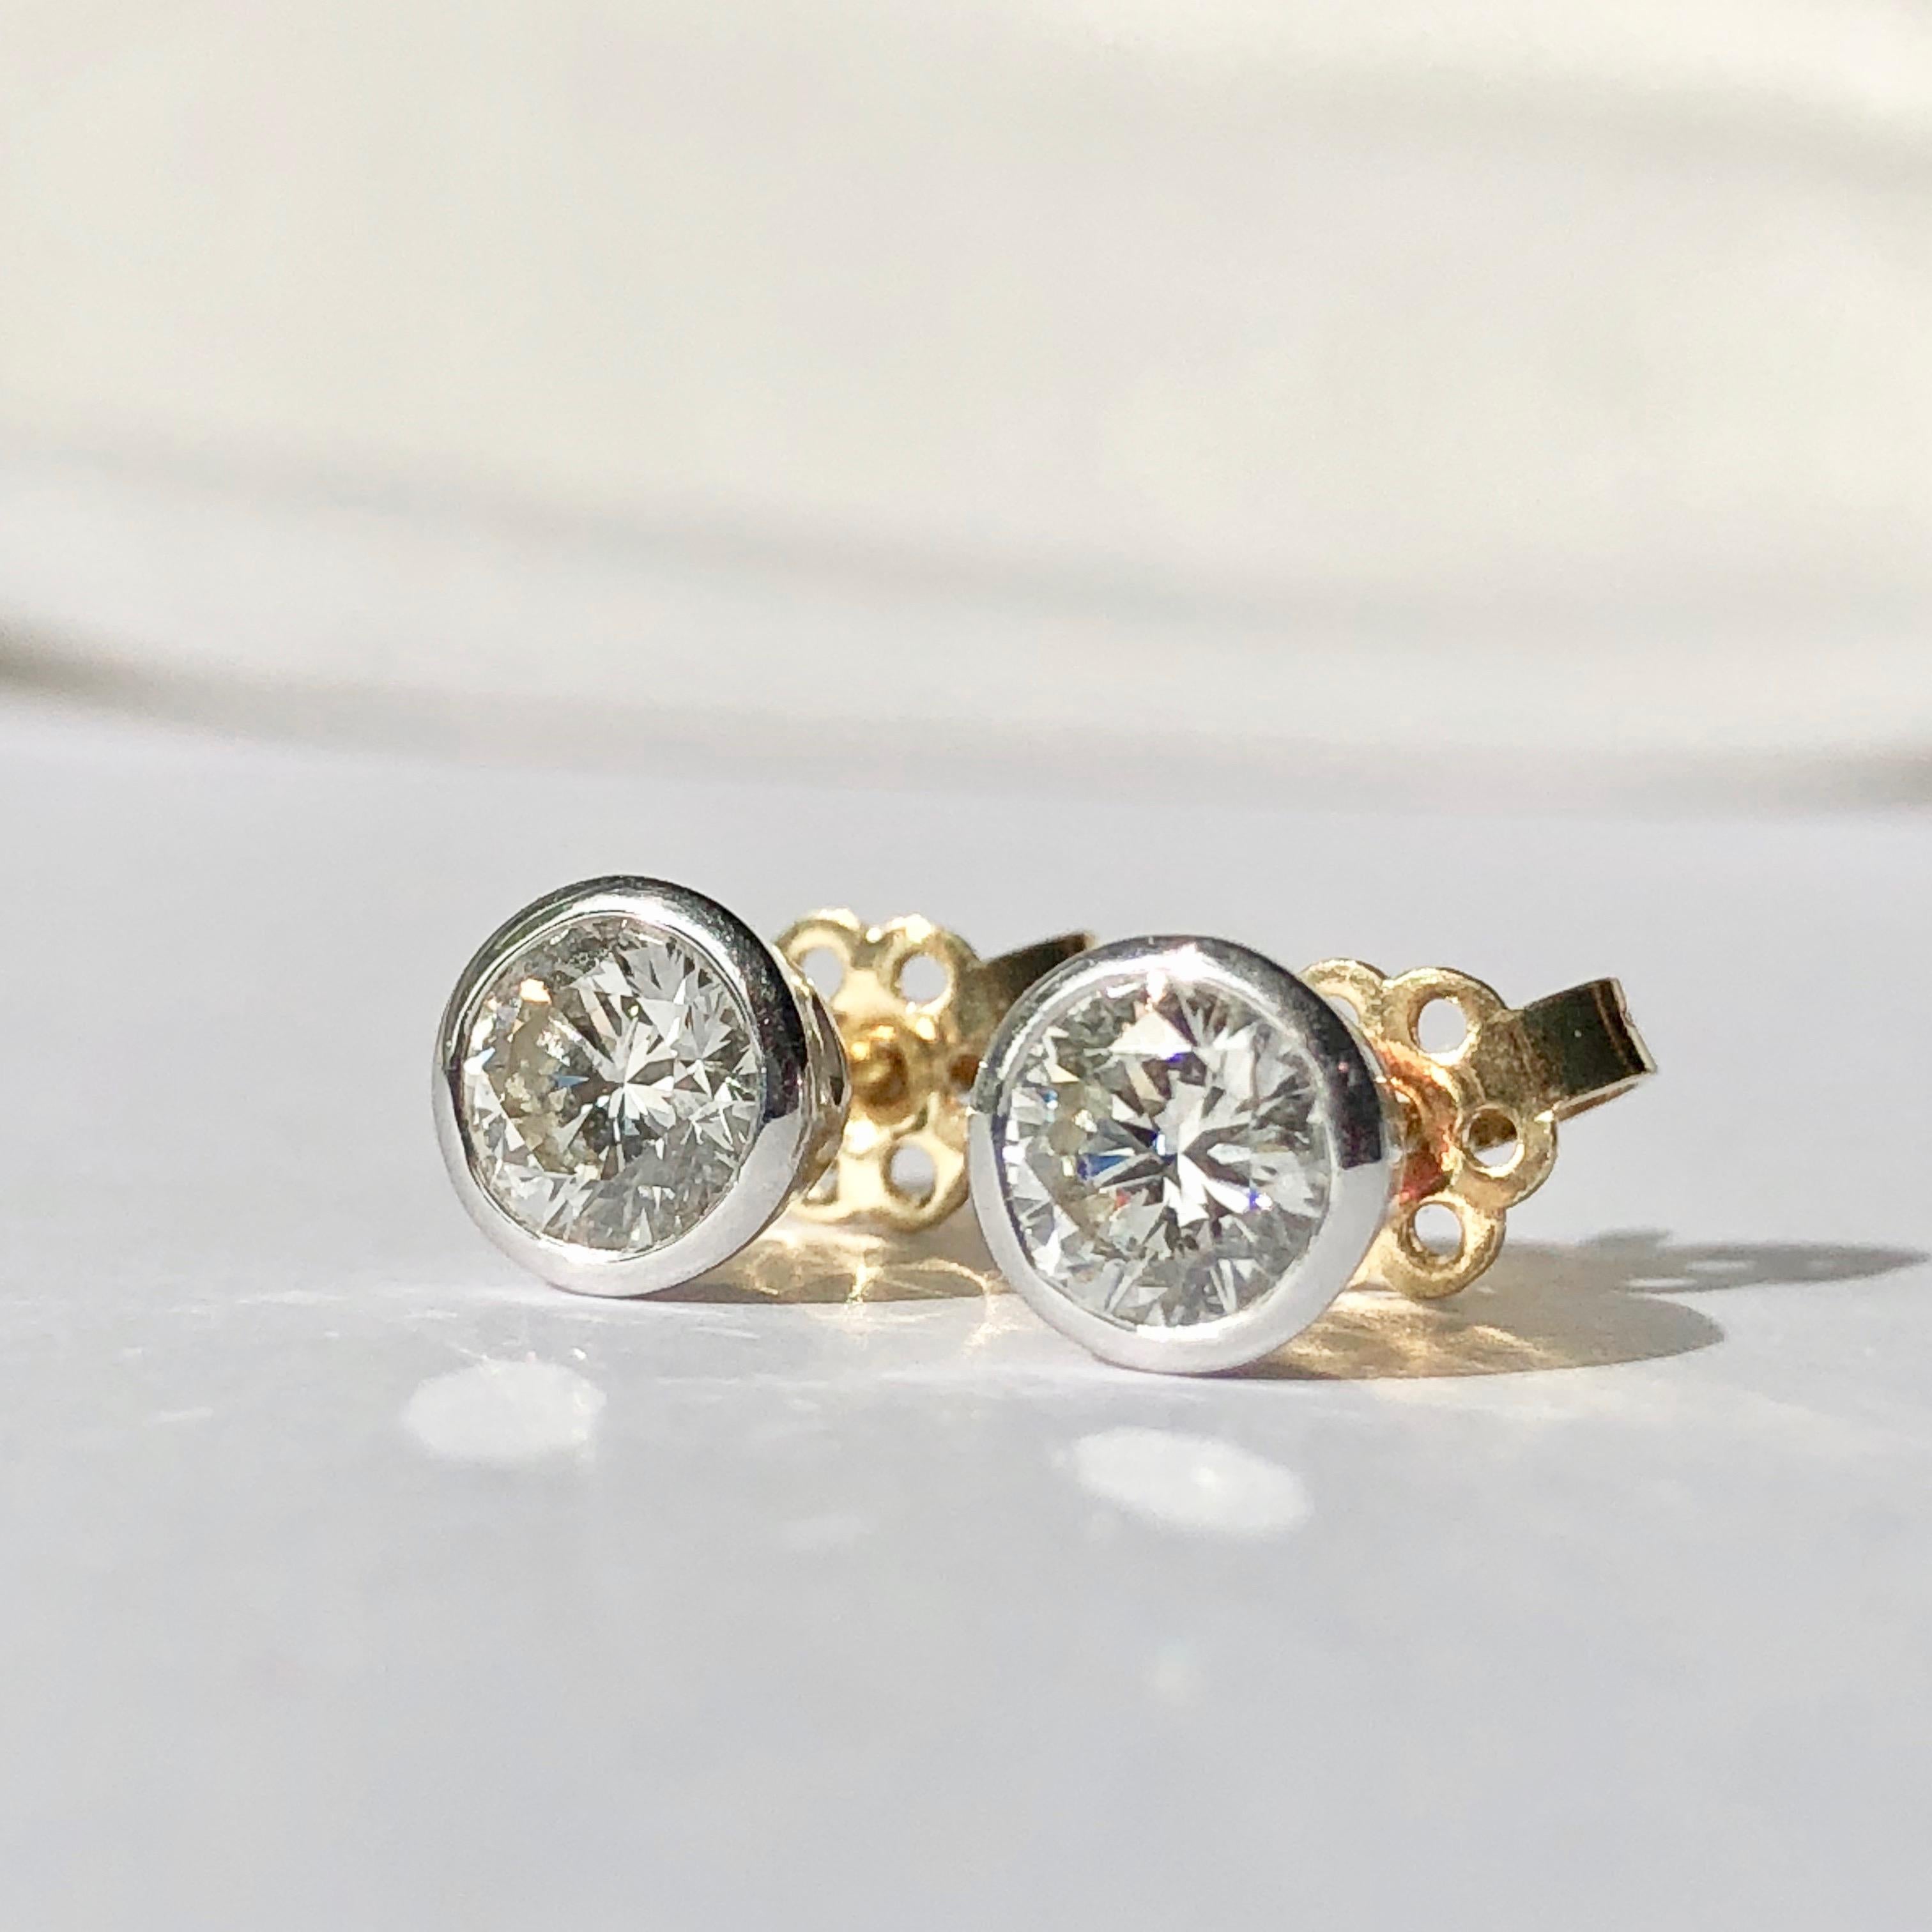 A Pair of Diamond Stud Earrings In Collet Setting

Each Diamond Weighs An Estimated .50ct Giving 1ct Total Weight 

The Diamonds Are Bright And Lively H Colour And VS/SI Clarity 

These Diamond Studs are White Gold Surround with Yellow Gold Posts -